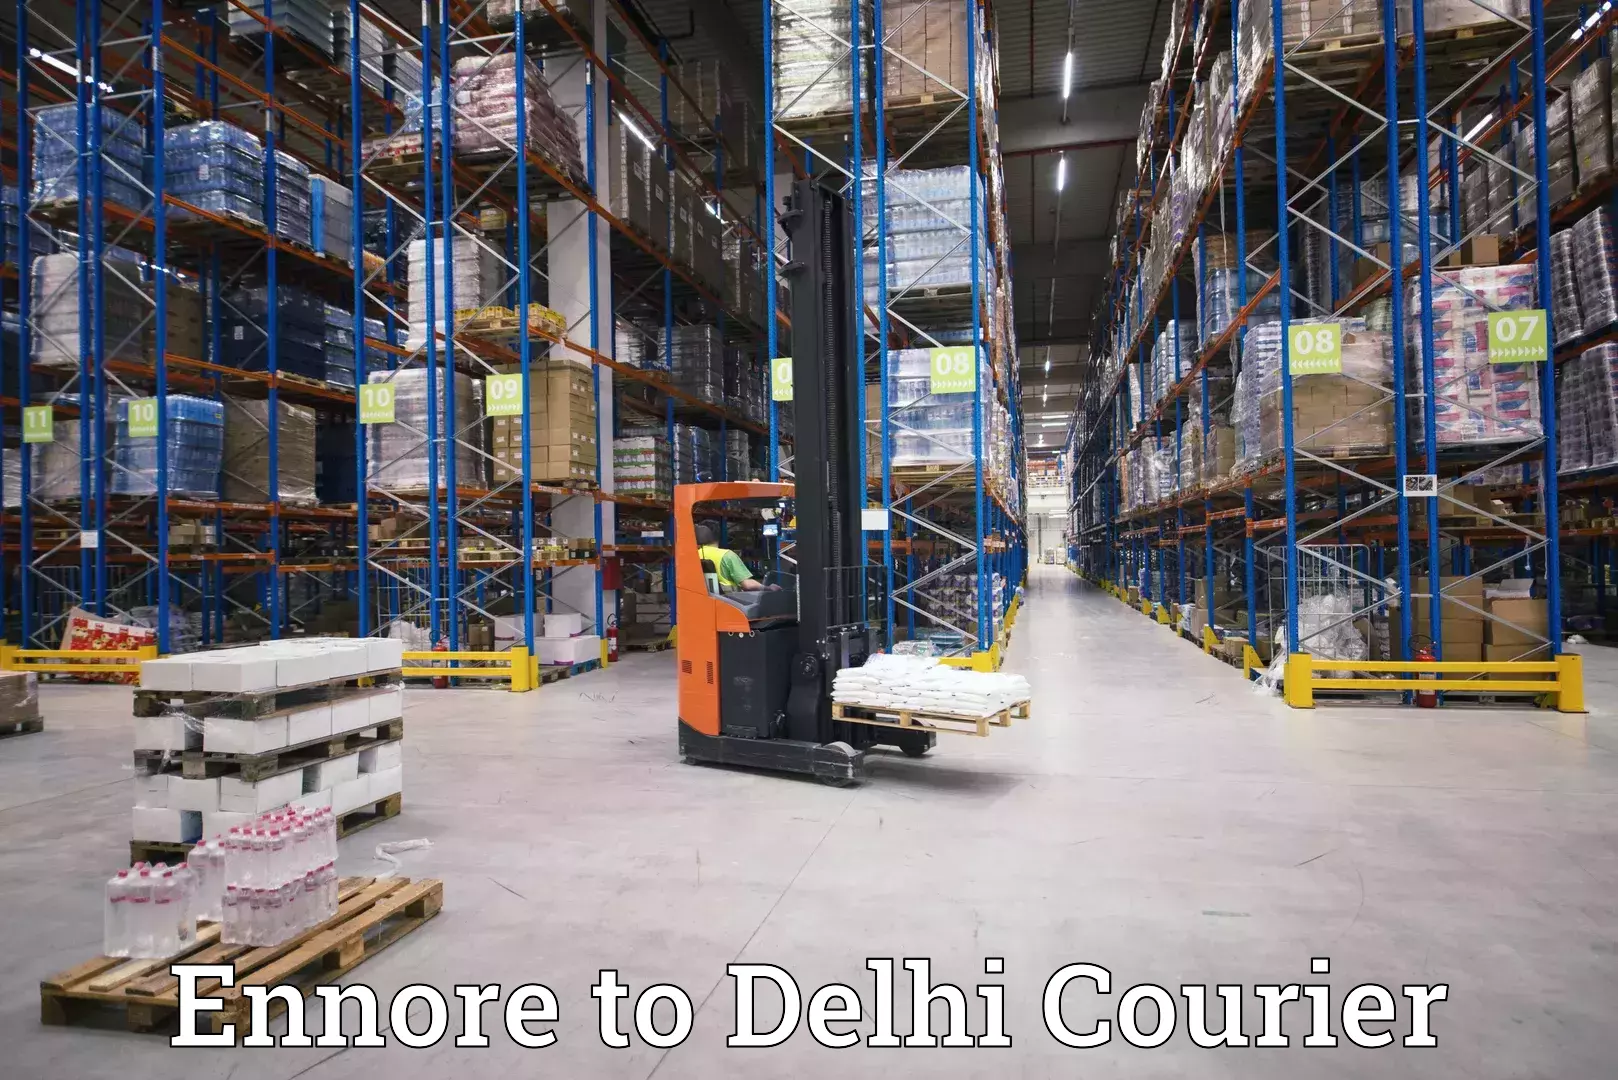 Courier service innovation Ennore to East Delhi